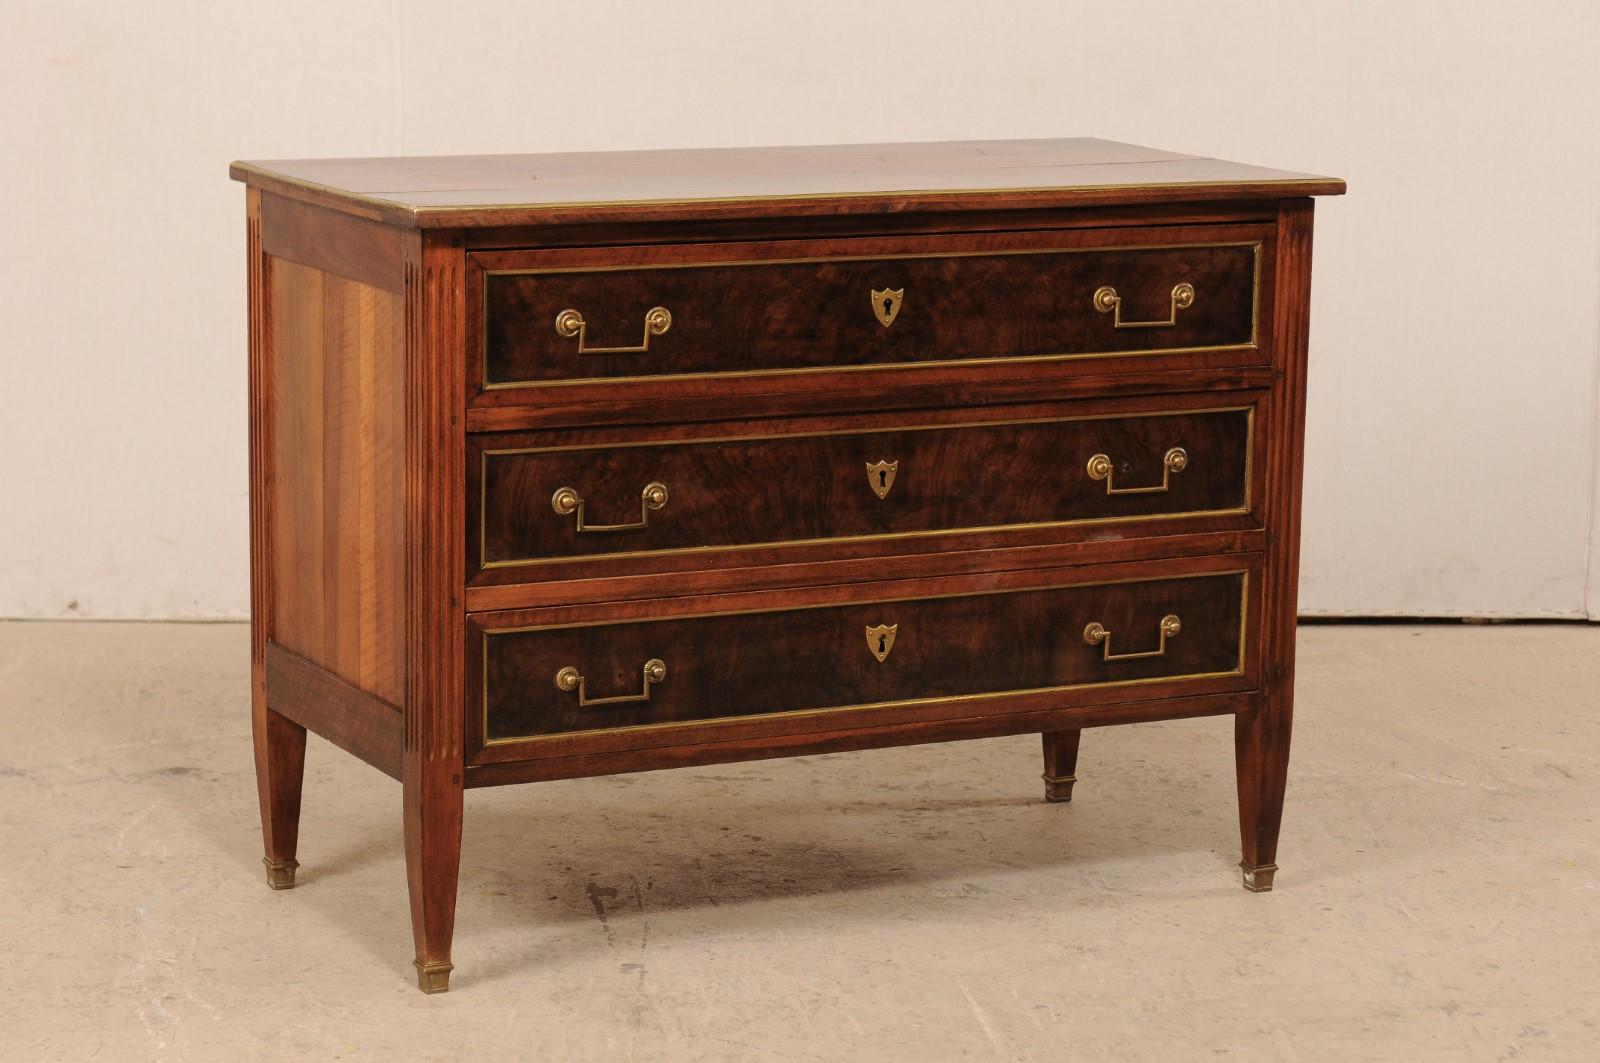 A sophisticated French neoclassical style chest of three drawers, from the early 19th century, with contrasting woods and brass trim. This antique chest from France features a rectangular-shaped top with brass trim edging, atop a neoclassical case